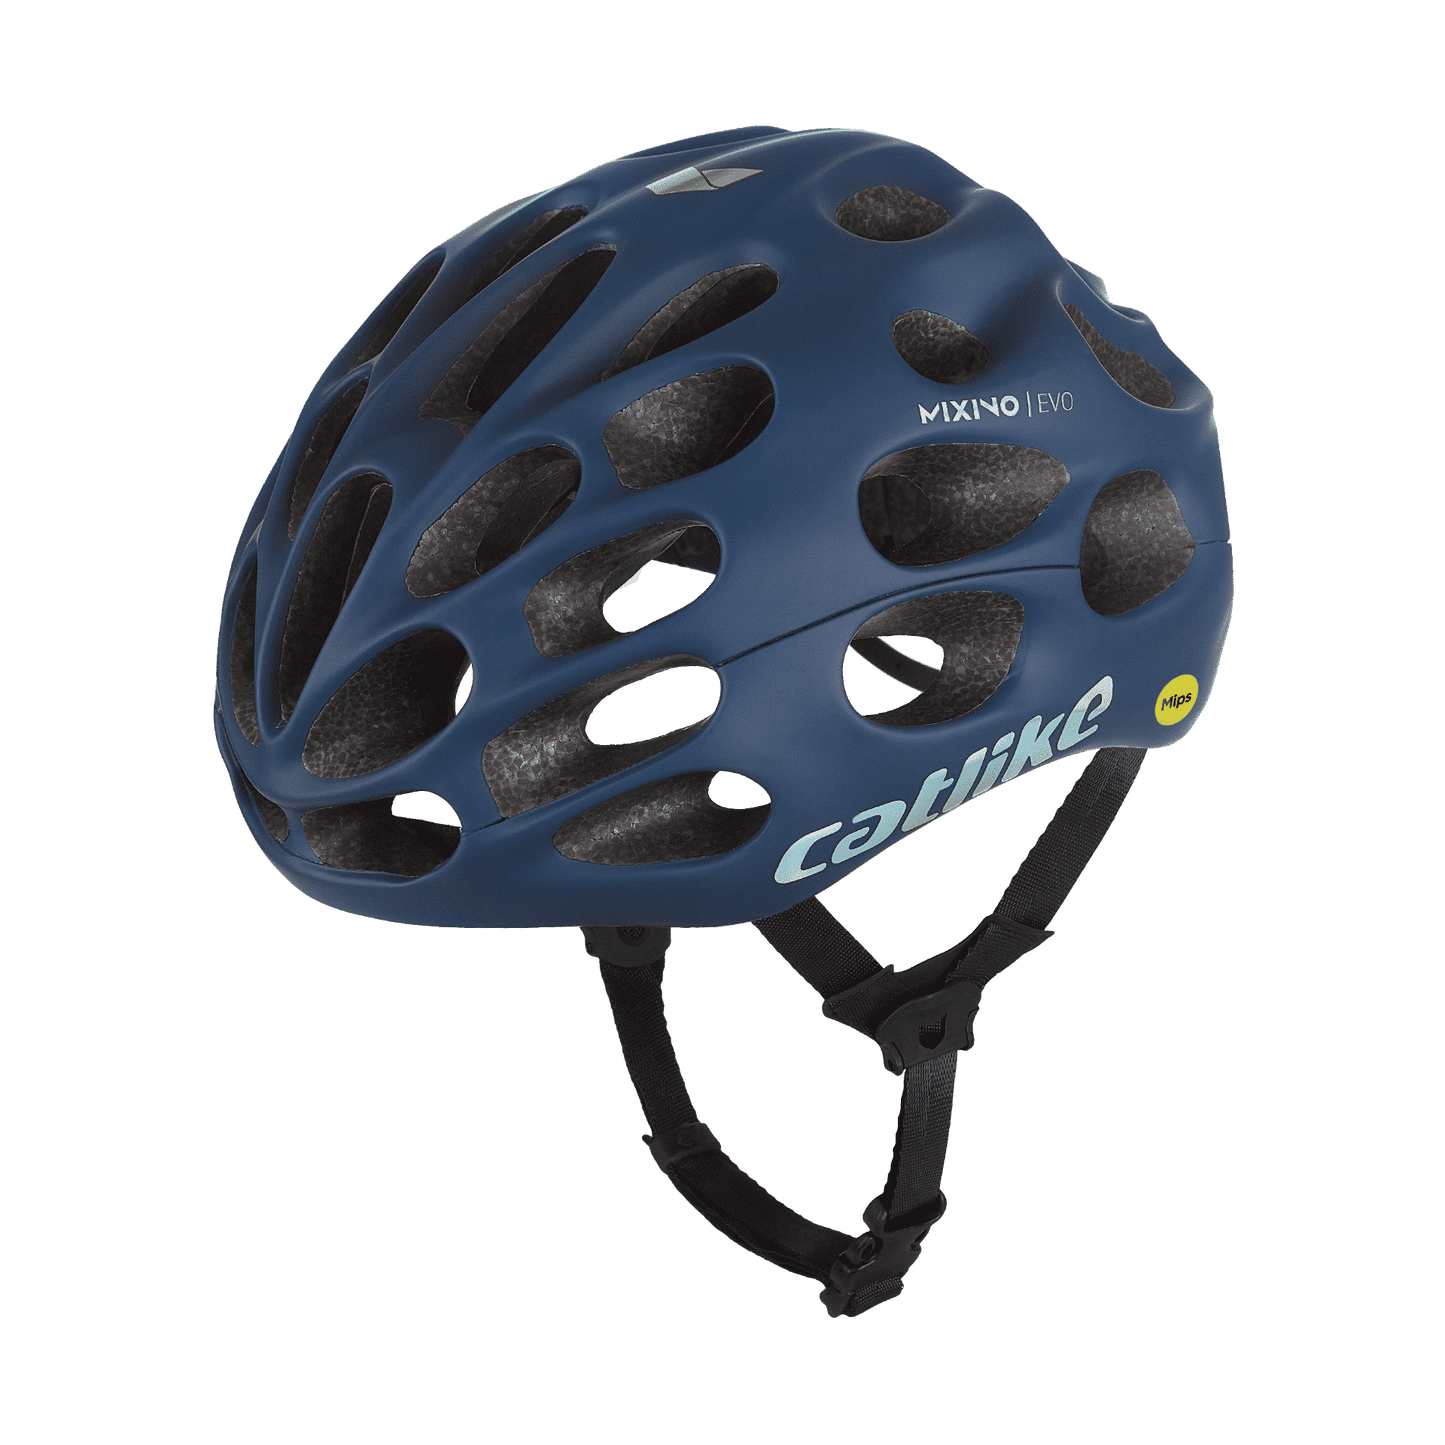 A product picture of the Catlike Mixino Evo Pro Road Helmet